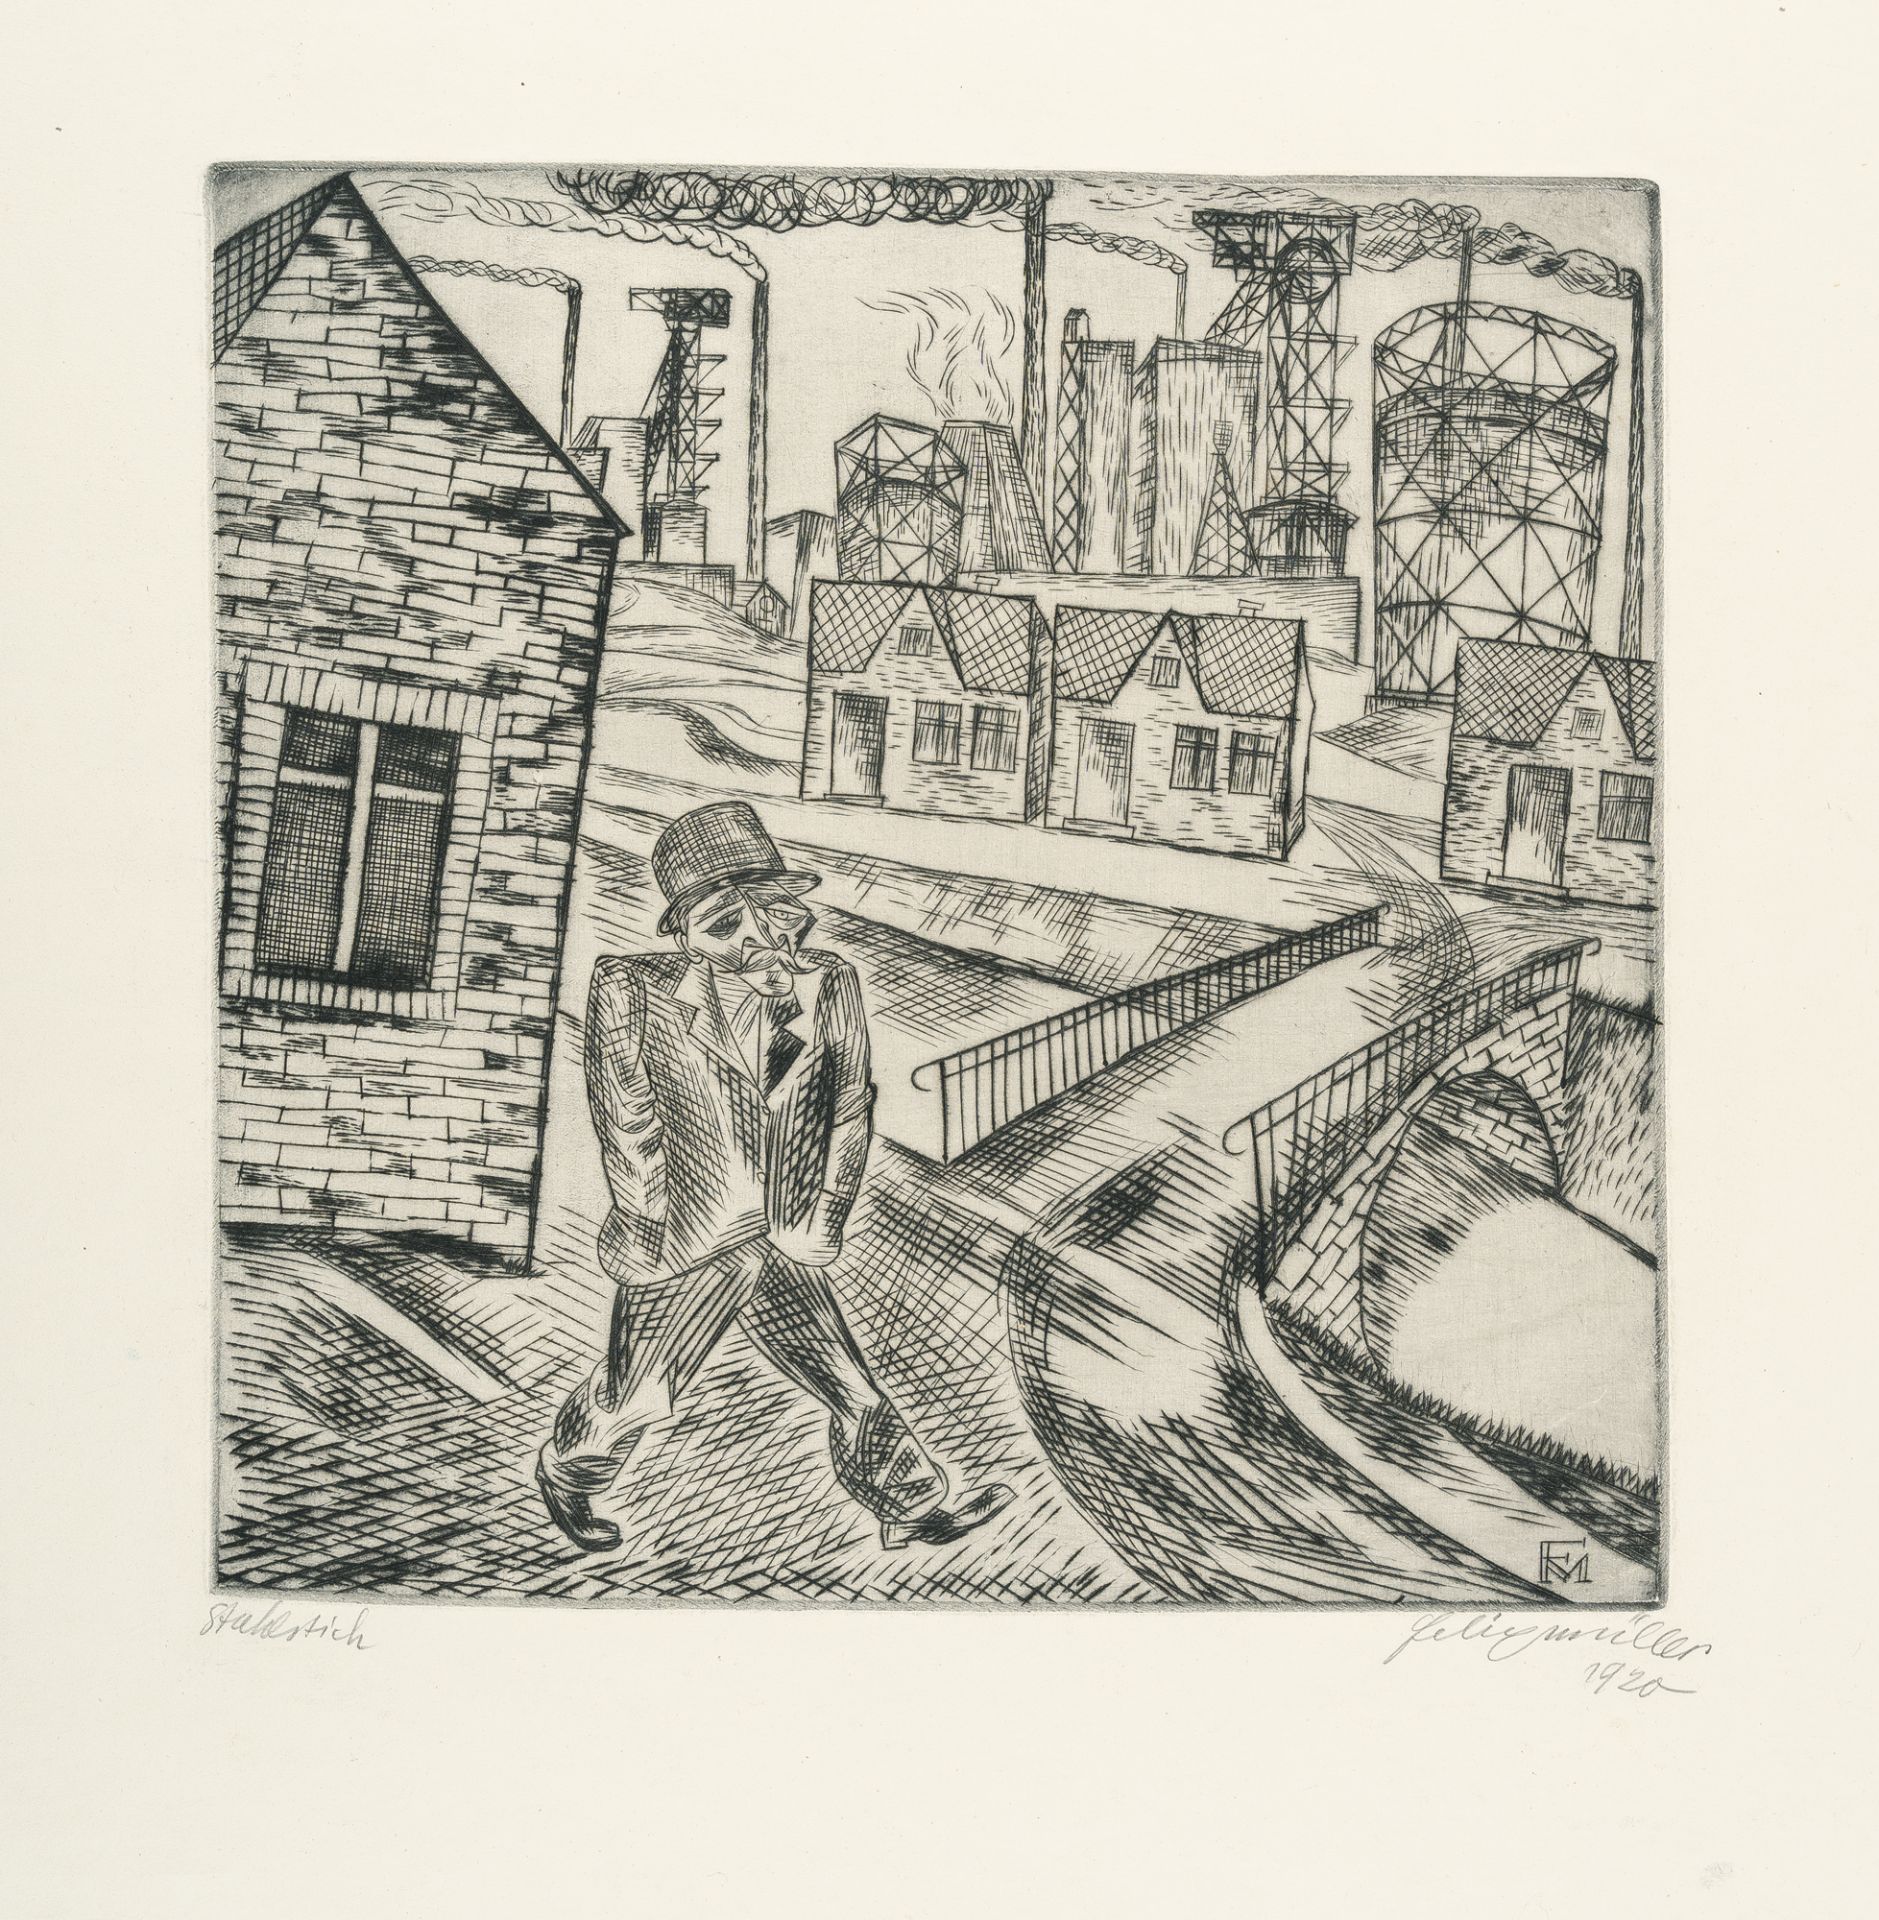 Conrad Felixmüller, „Ruhrkohlerevier“ (Coal quarry in the Ruhr).Etching on firm wove. 1920. Ca. 34 x